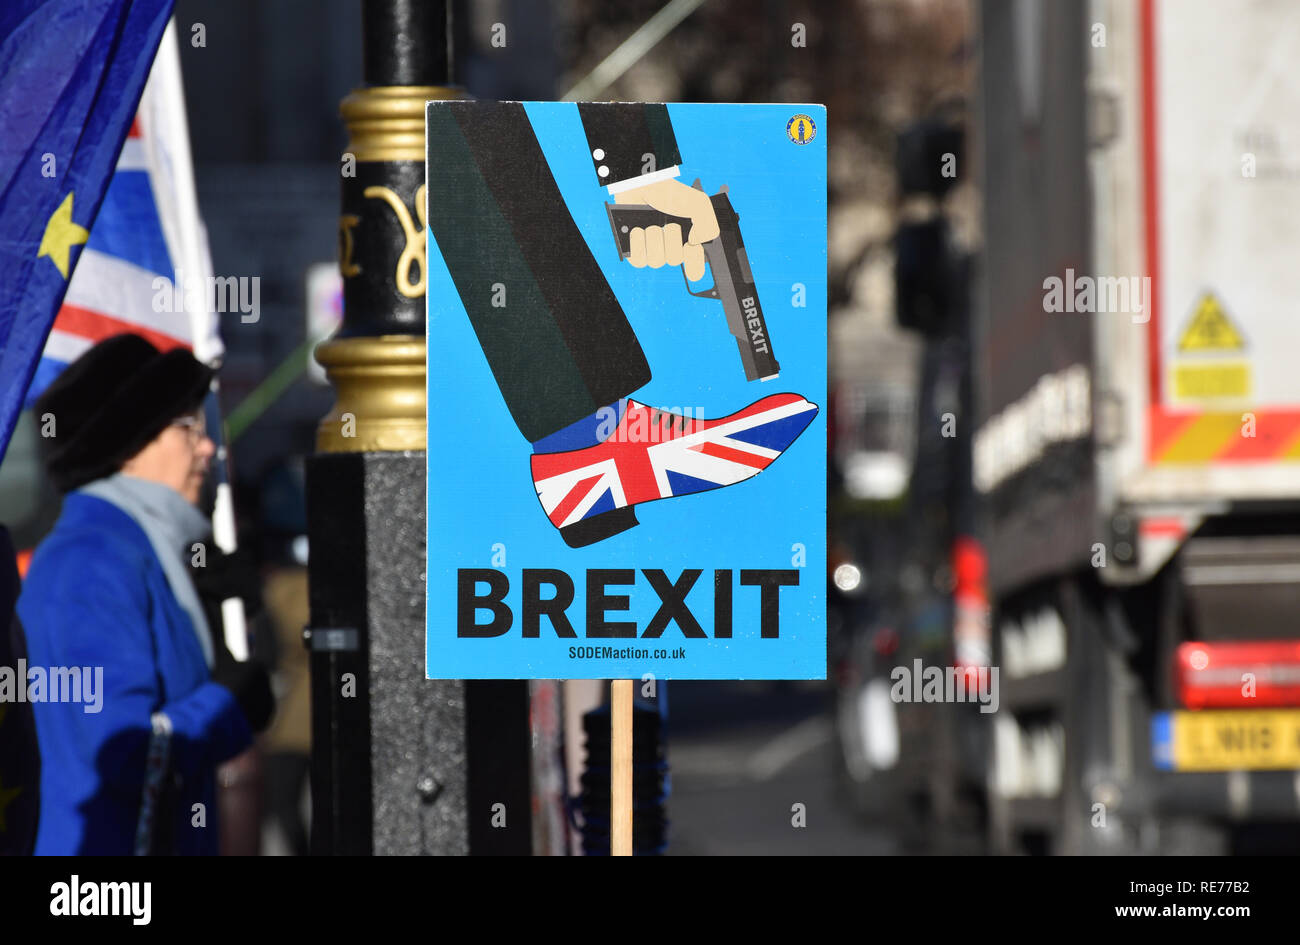 An anti Brexit sign at the roadside outside the British parliament in Westminster, London, UK. January 2019 Stock Photo